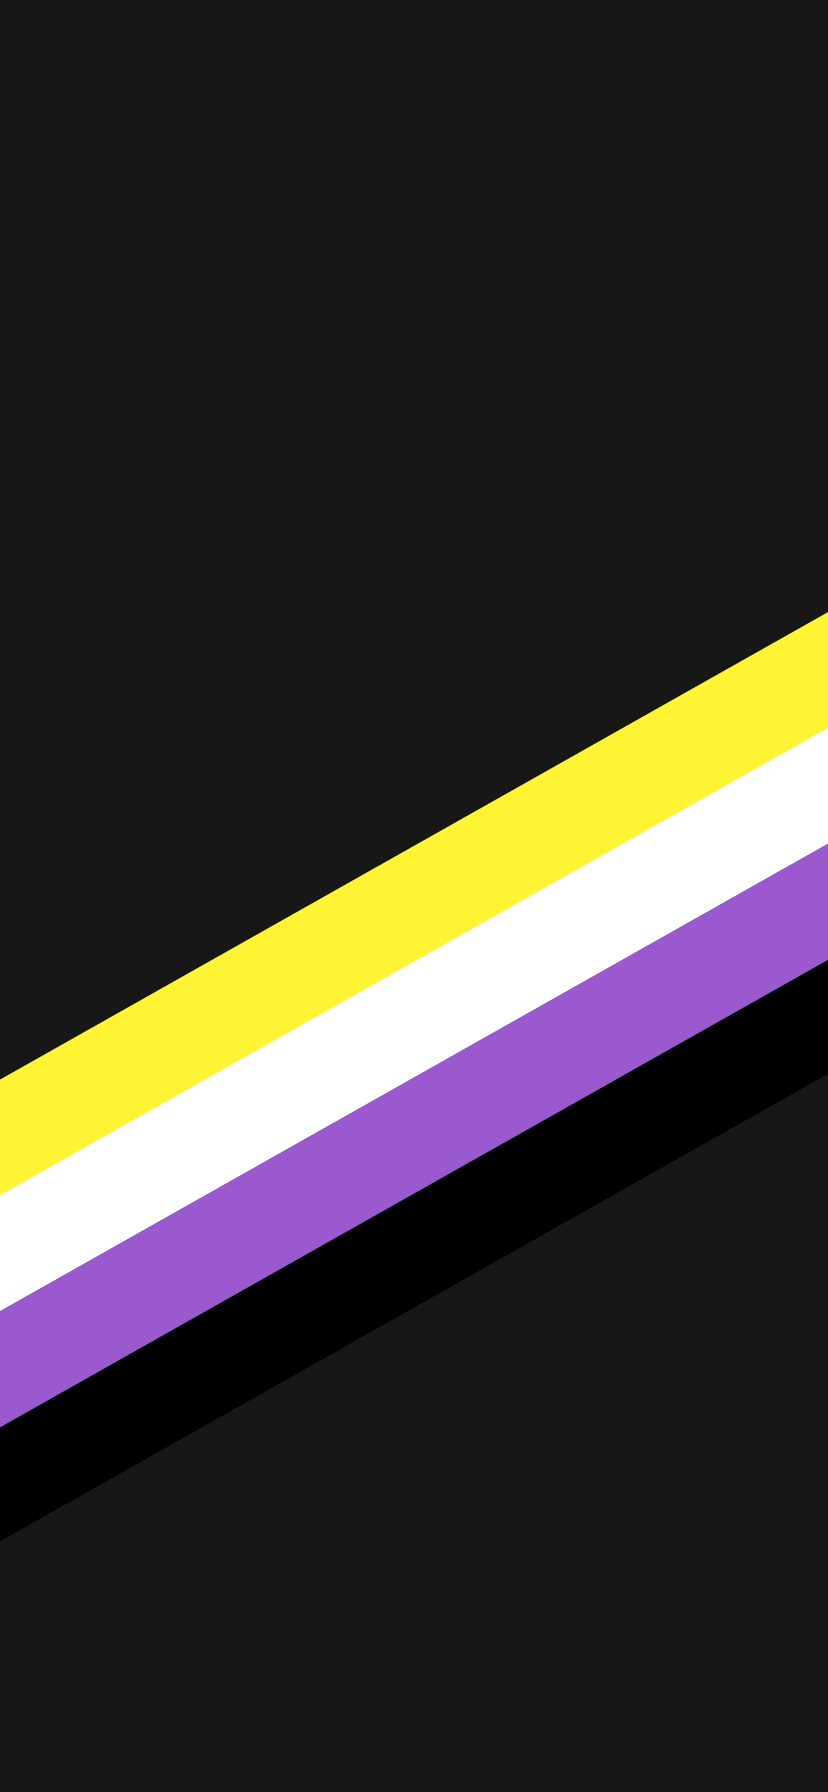 nonbinary flag wallpaper by Vinicius404  Download on ZEDGE  a4db